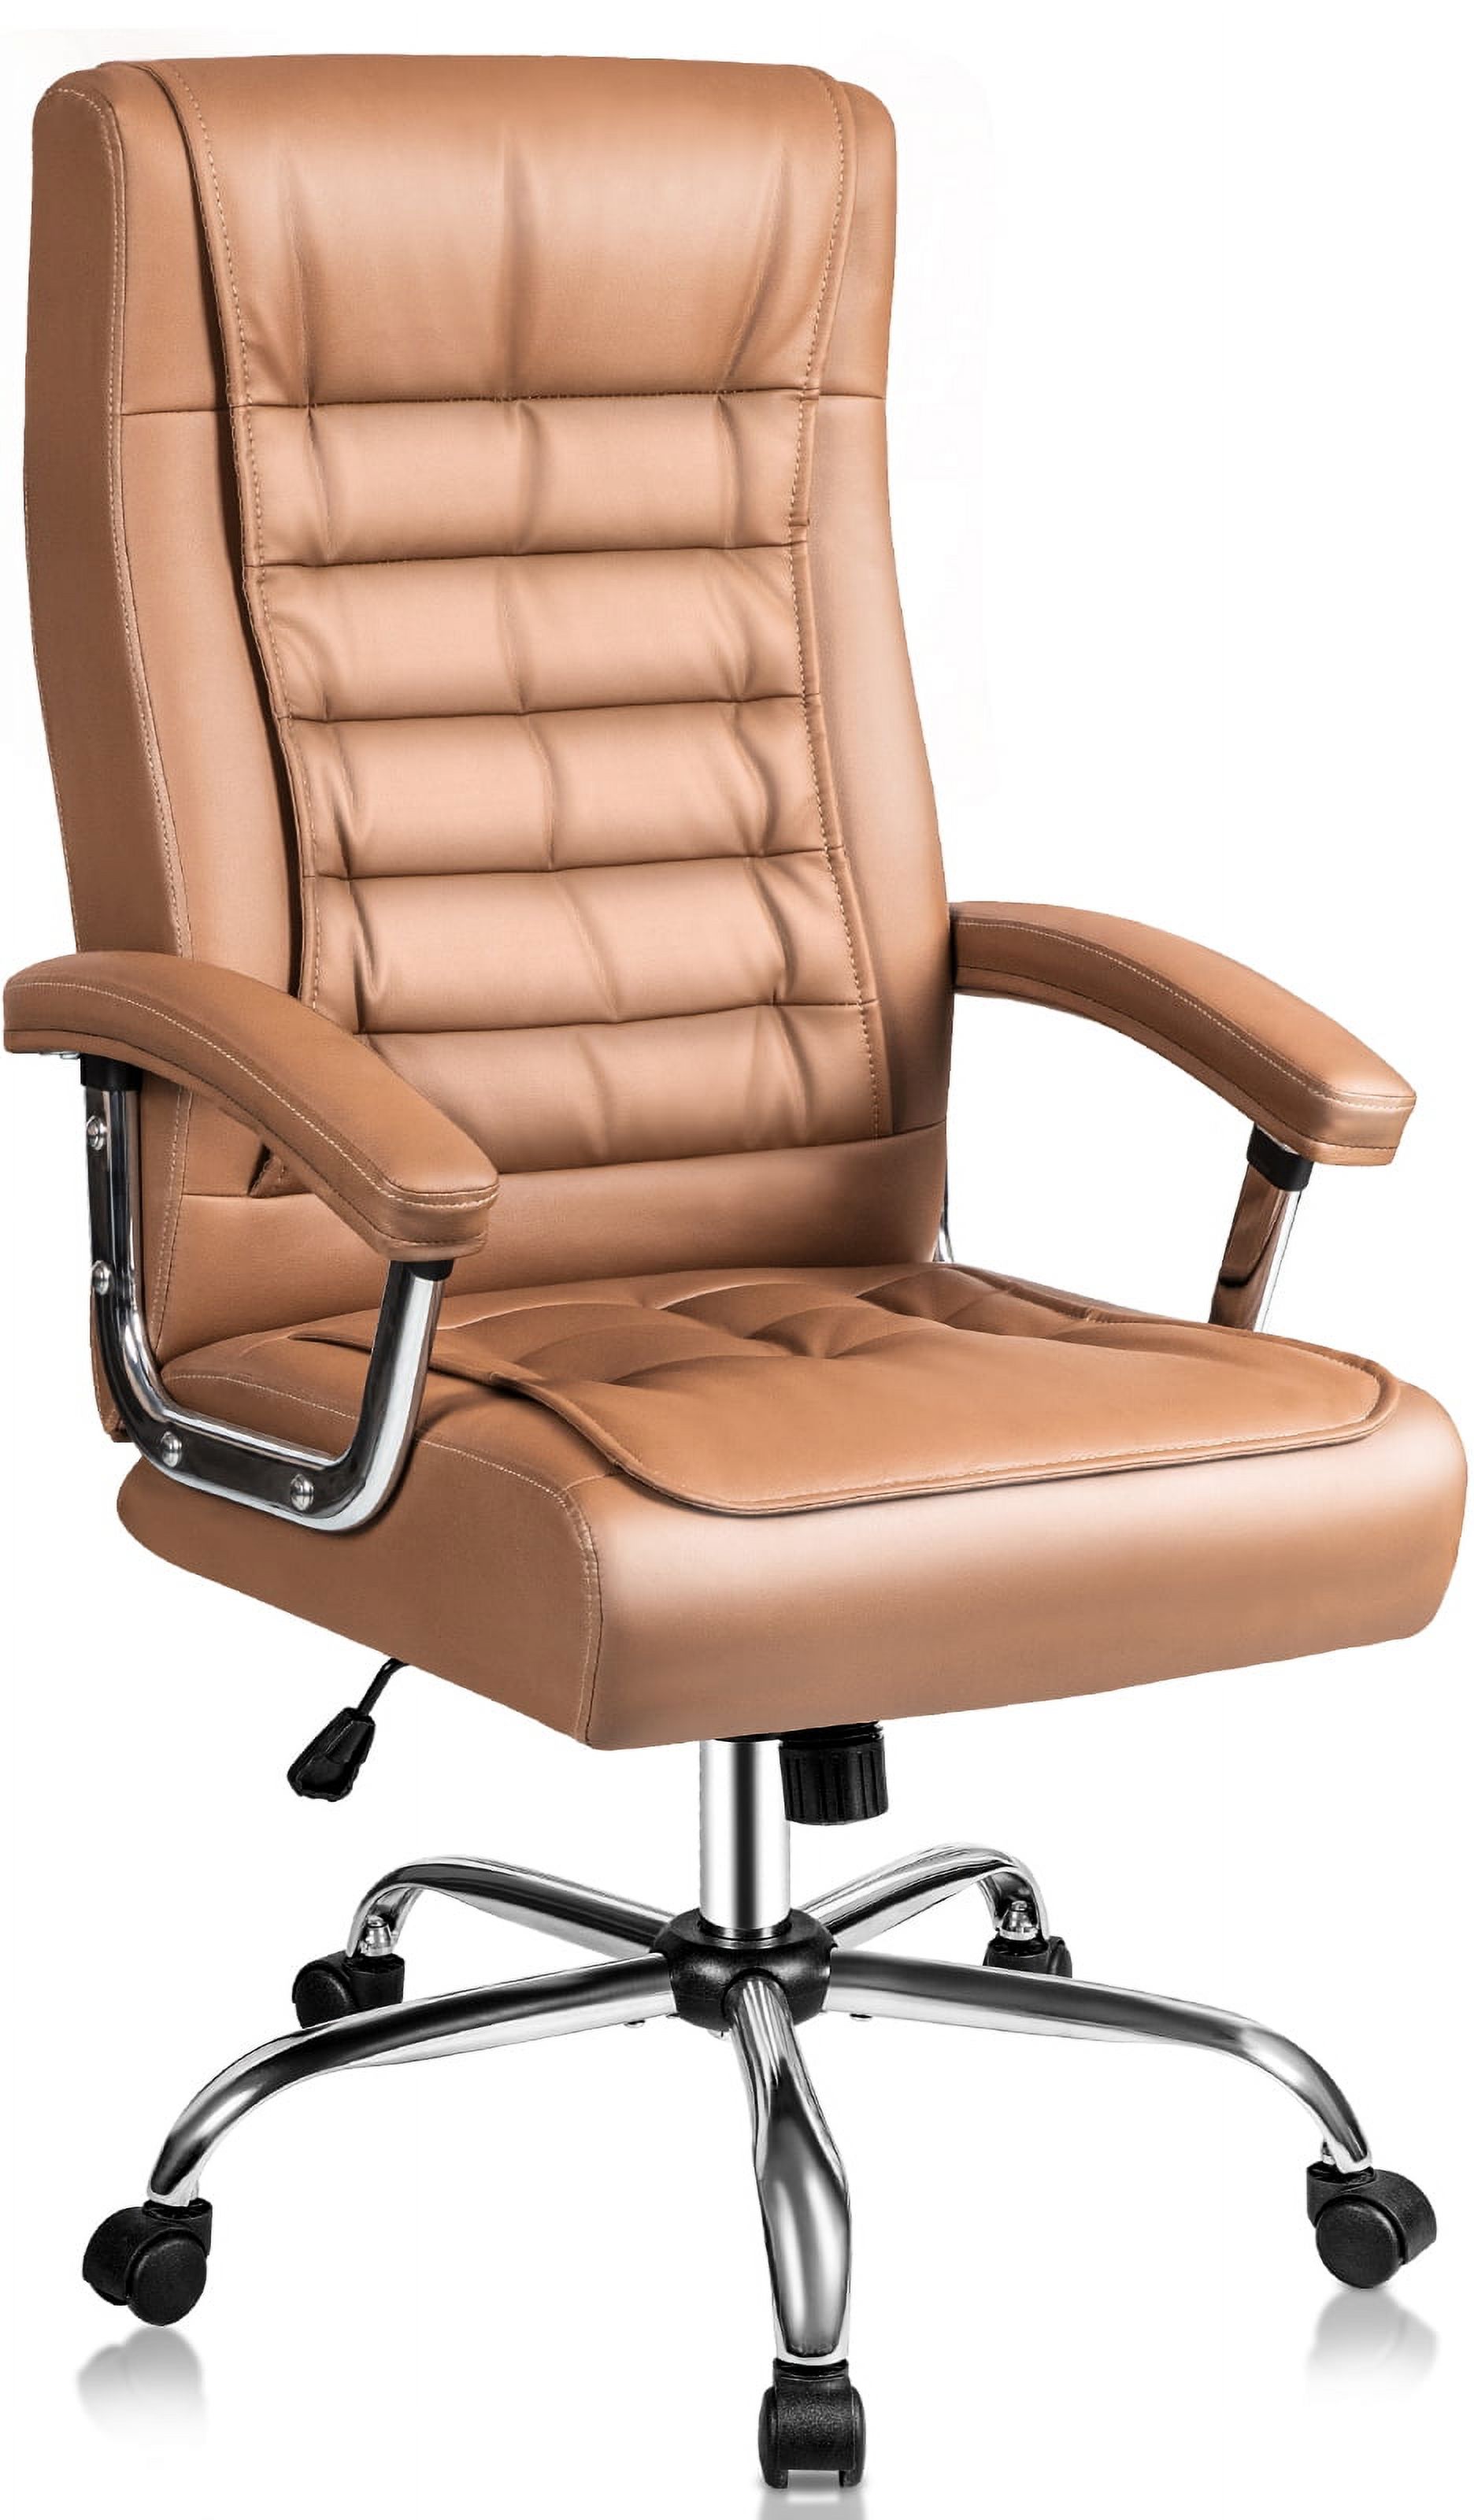 Waleaf Office Chair with Spring Cushion,400LBS High Back Computer Chair with Padded Armrest, Khaki - image 1 of 7